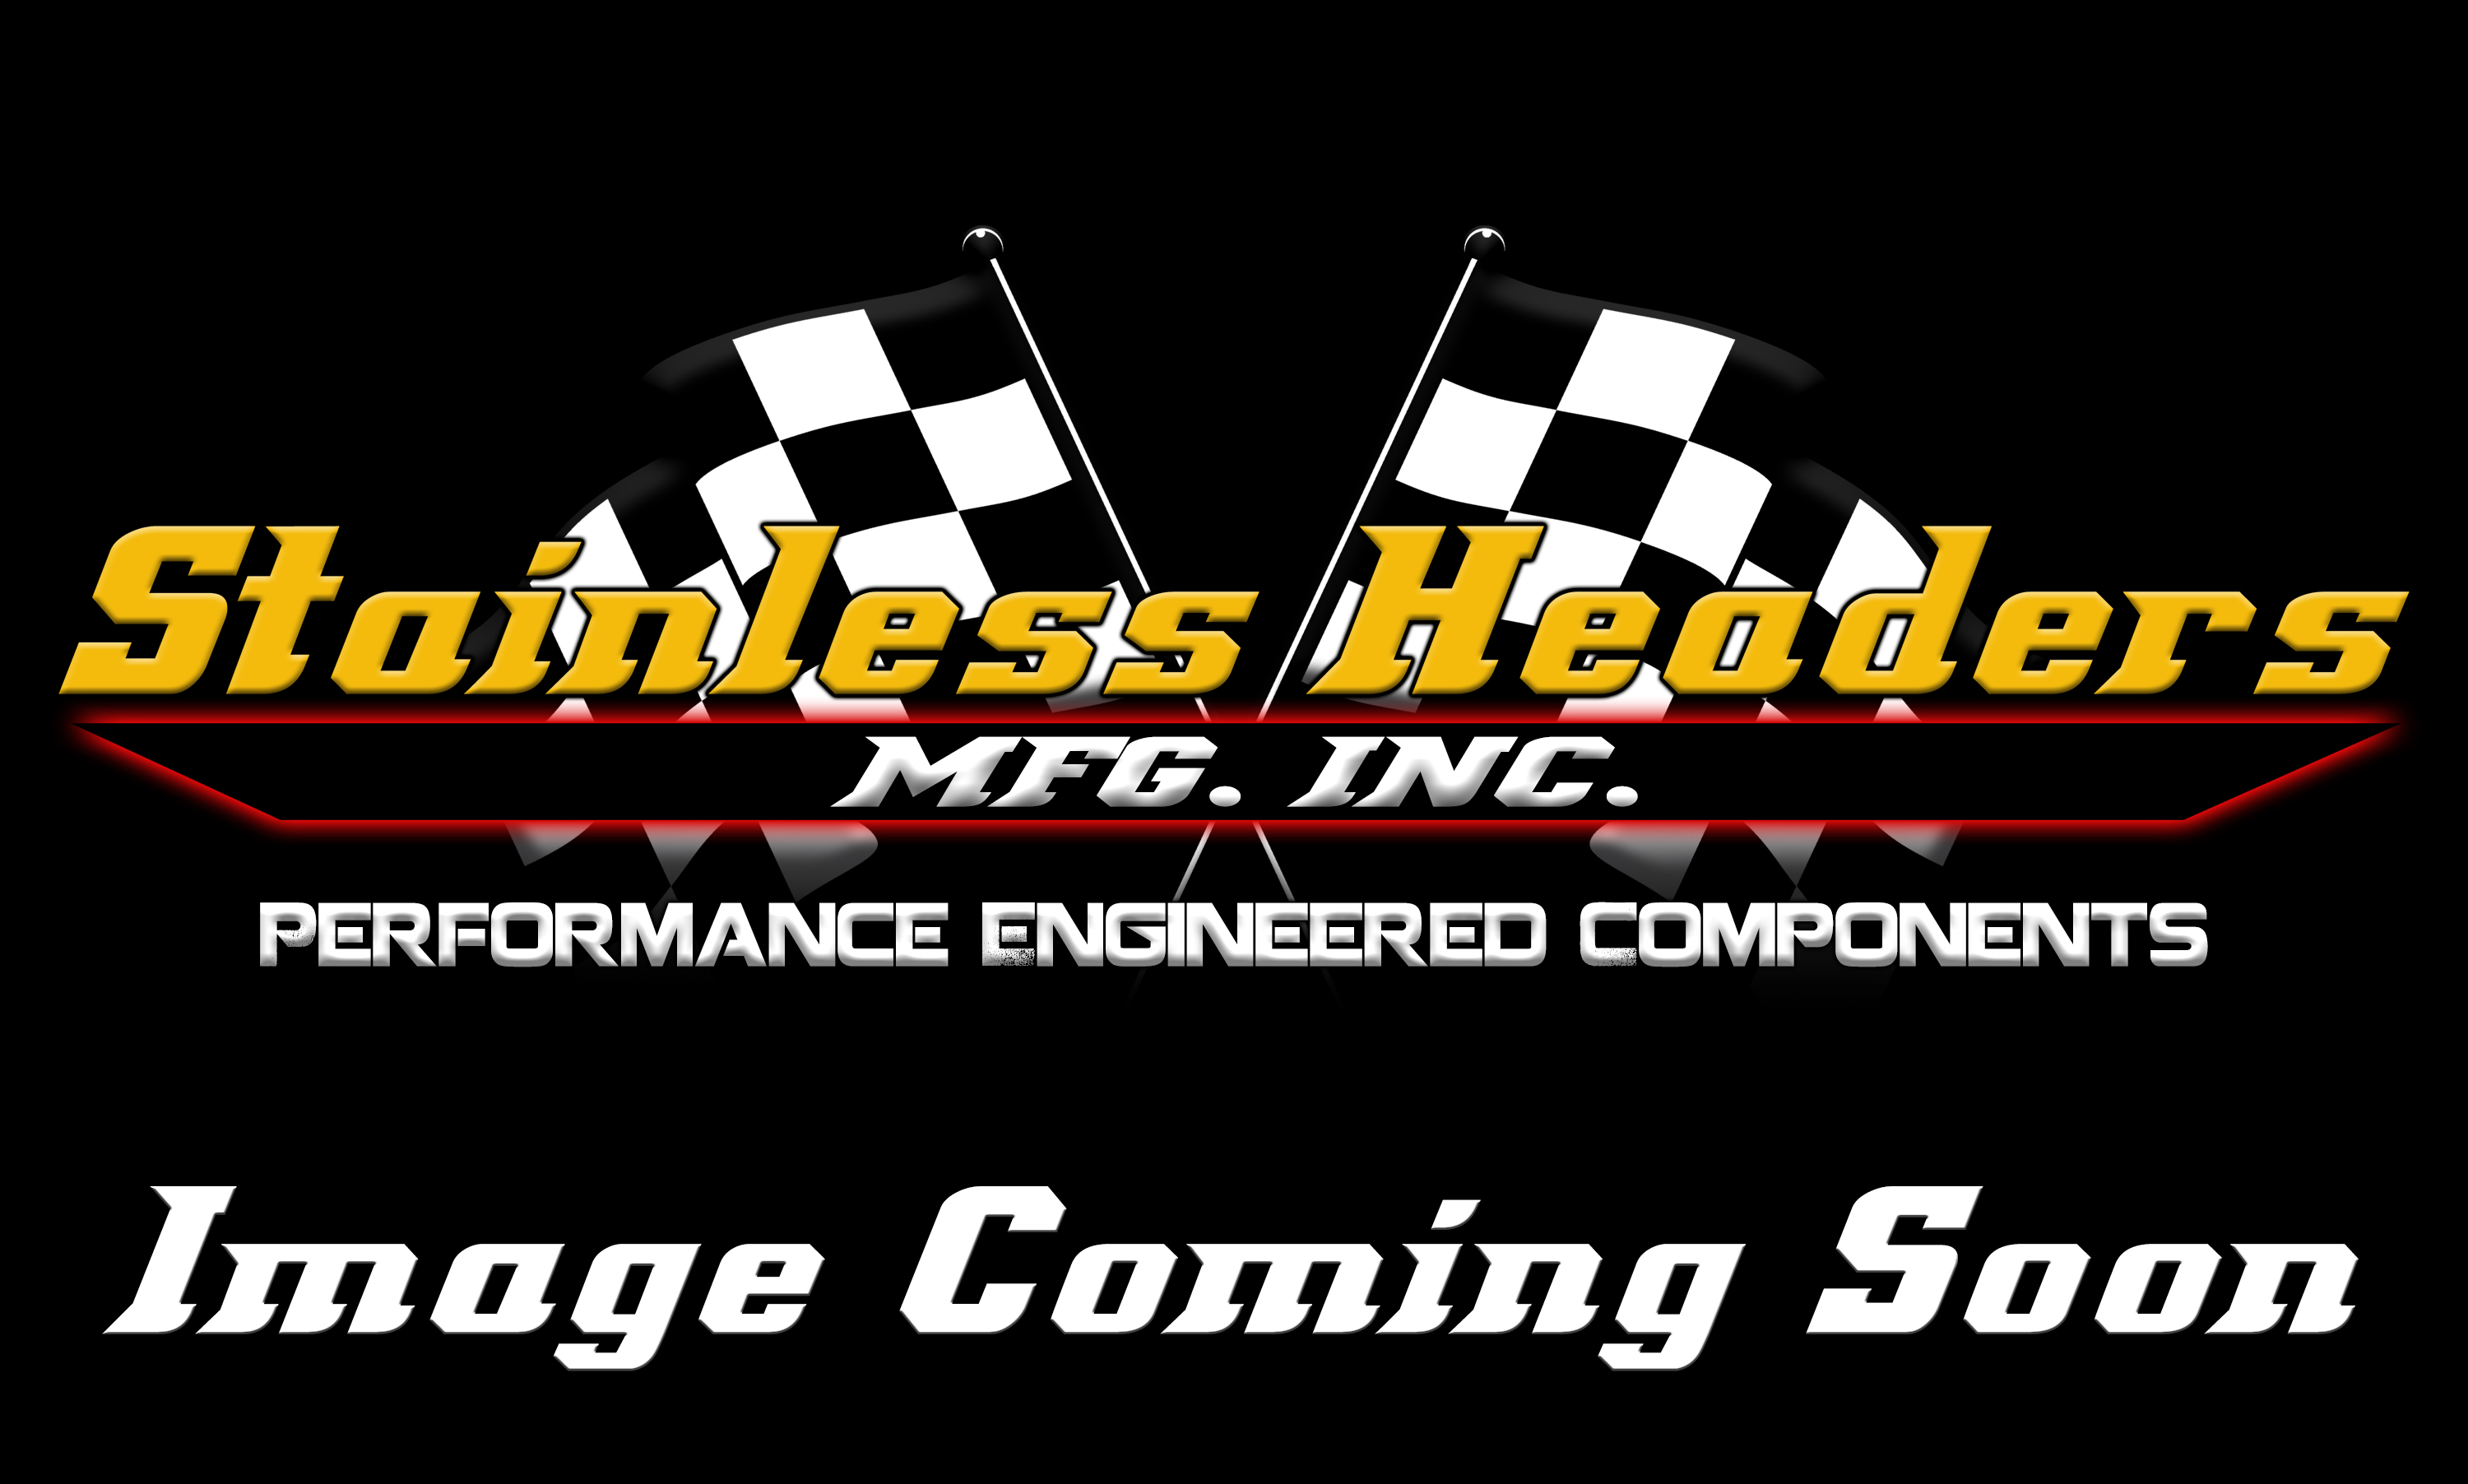 Stainless Headers - 2 3/8" Primary 3 into 1 Performance Merge Collector-16ga 321ss - Image 1